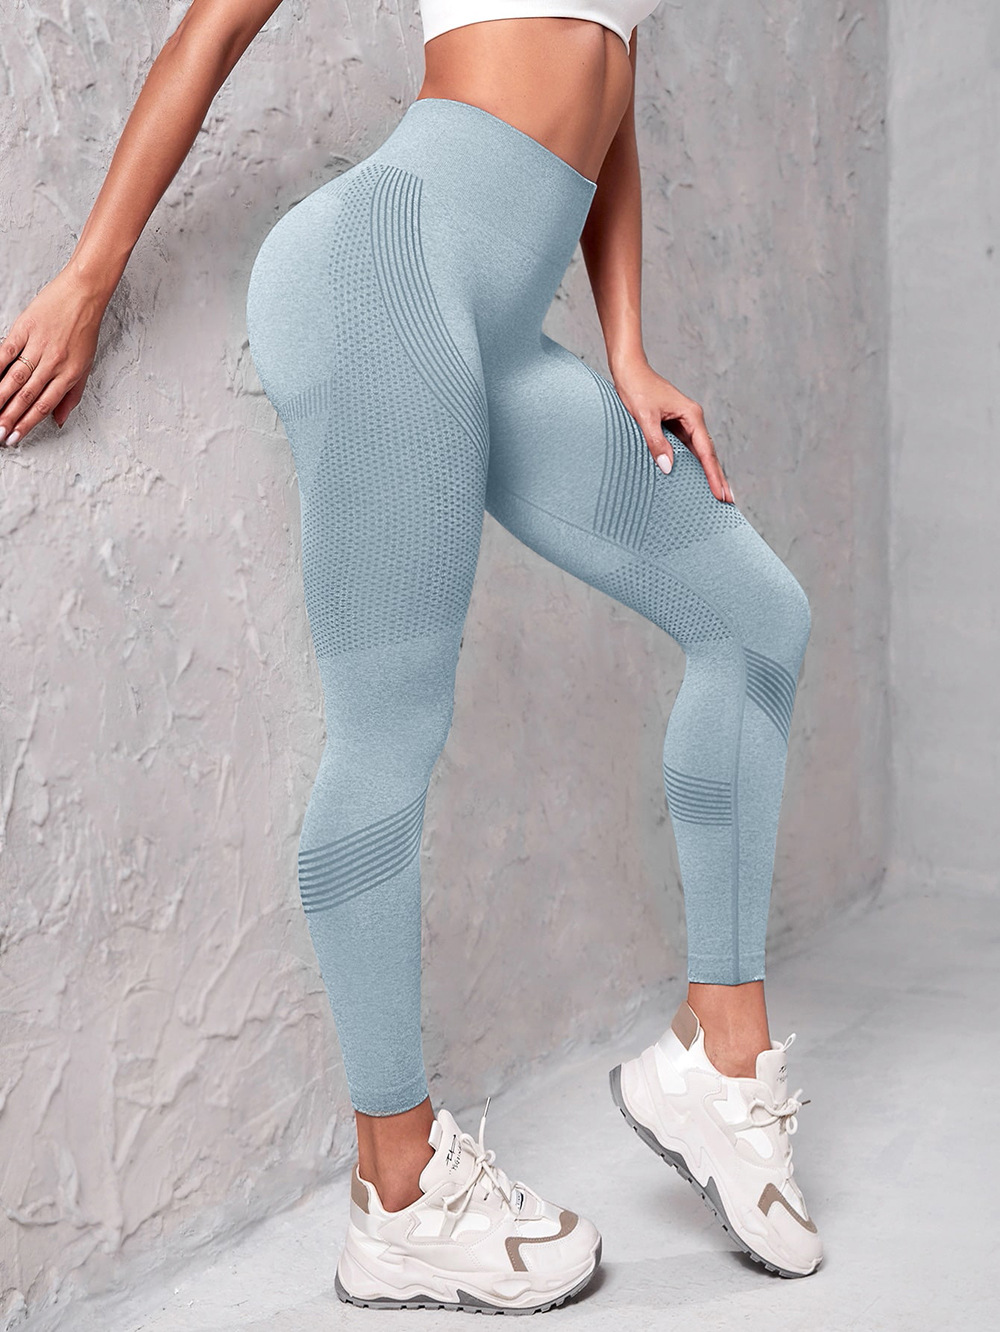 Womens High Waisted Yoga Pants Solid Color Workout Leggings For Fitness,  Gym, Running From Xiadou_trading, $8.31